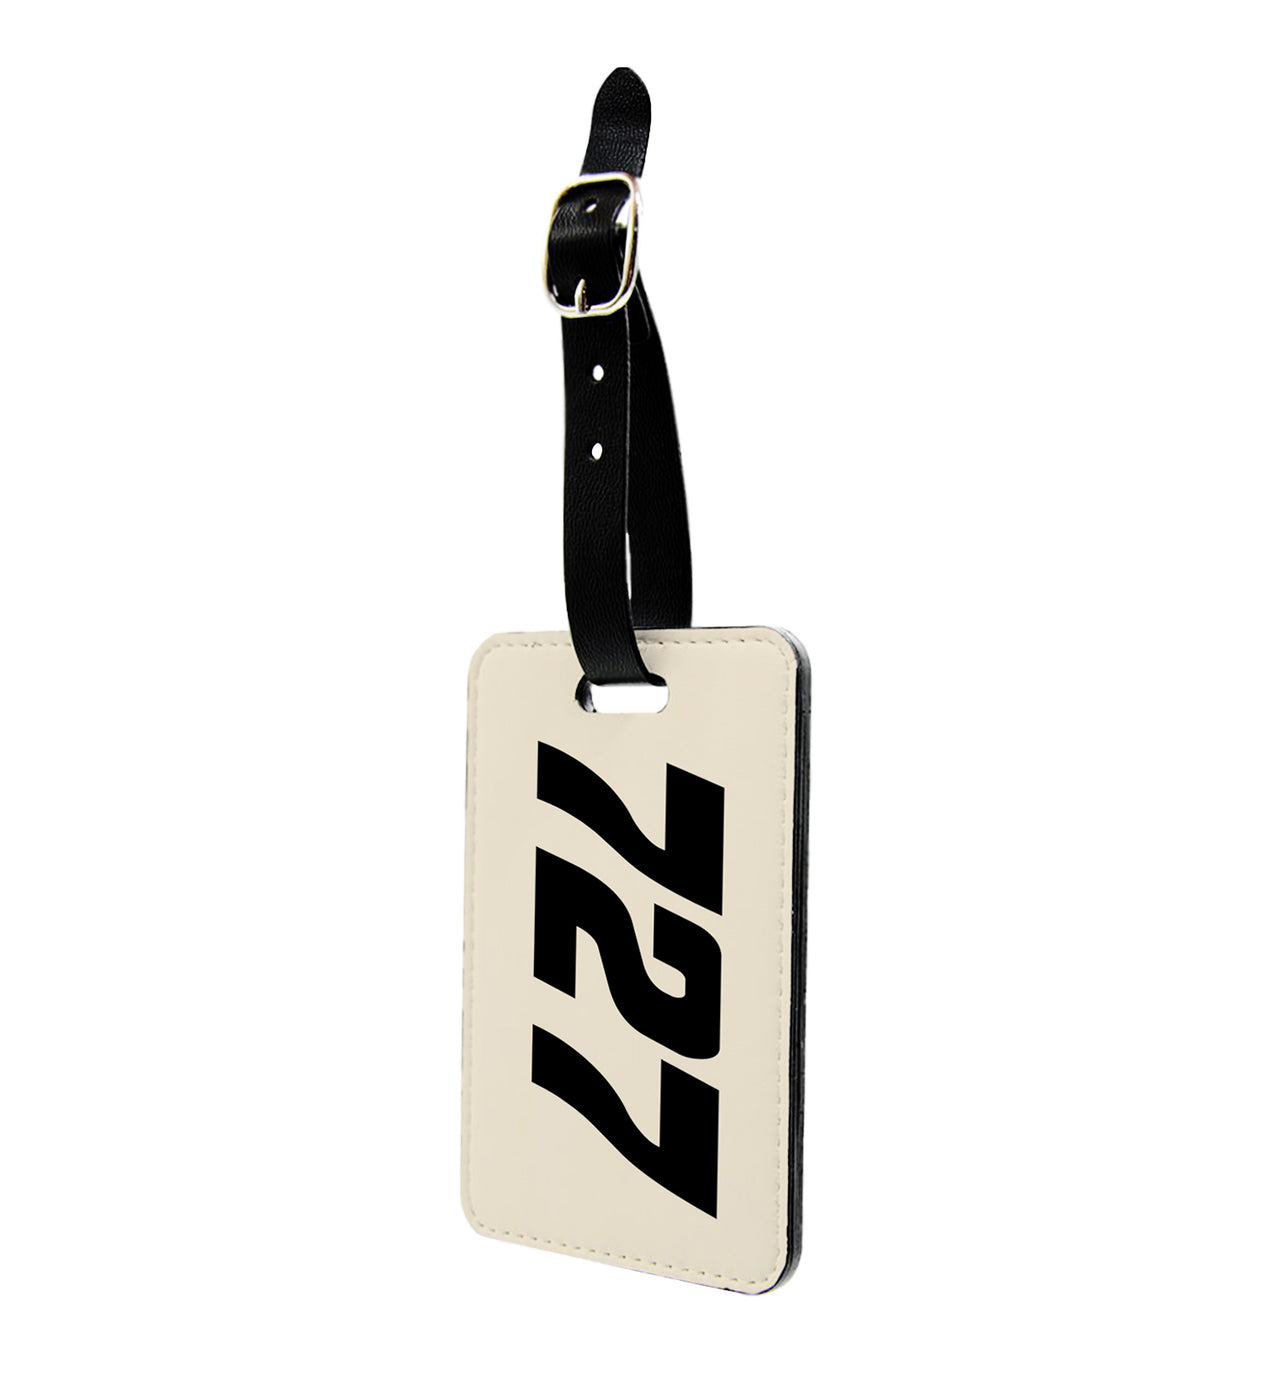 Boeing 727 Text Designed Luggage Tag